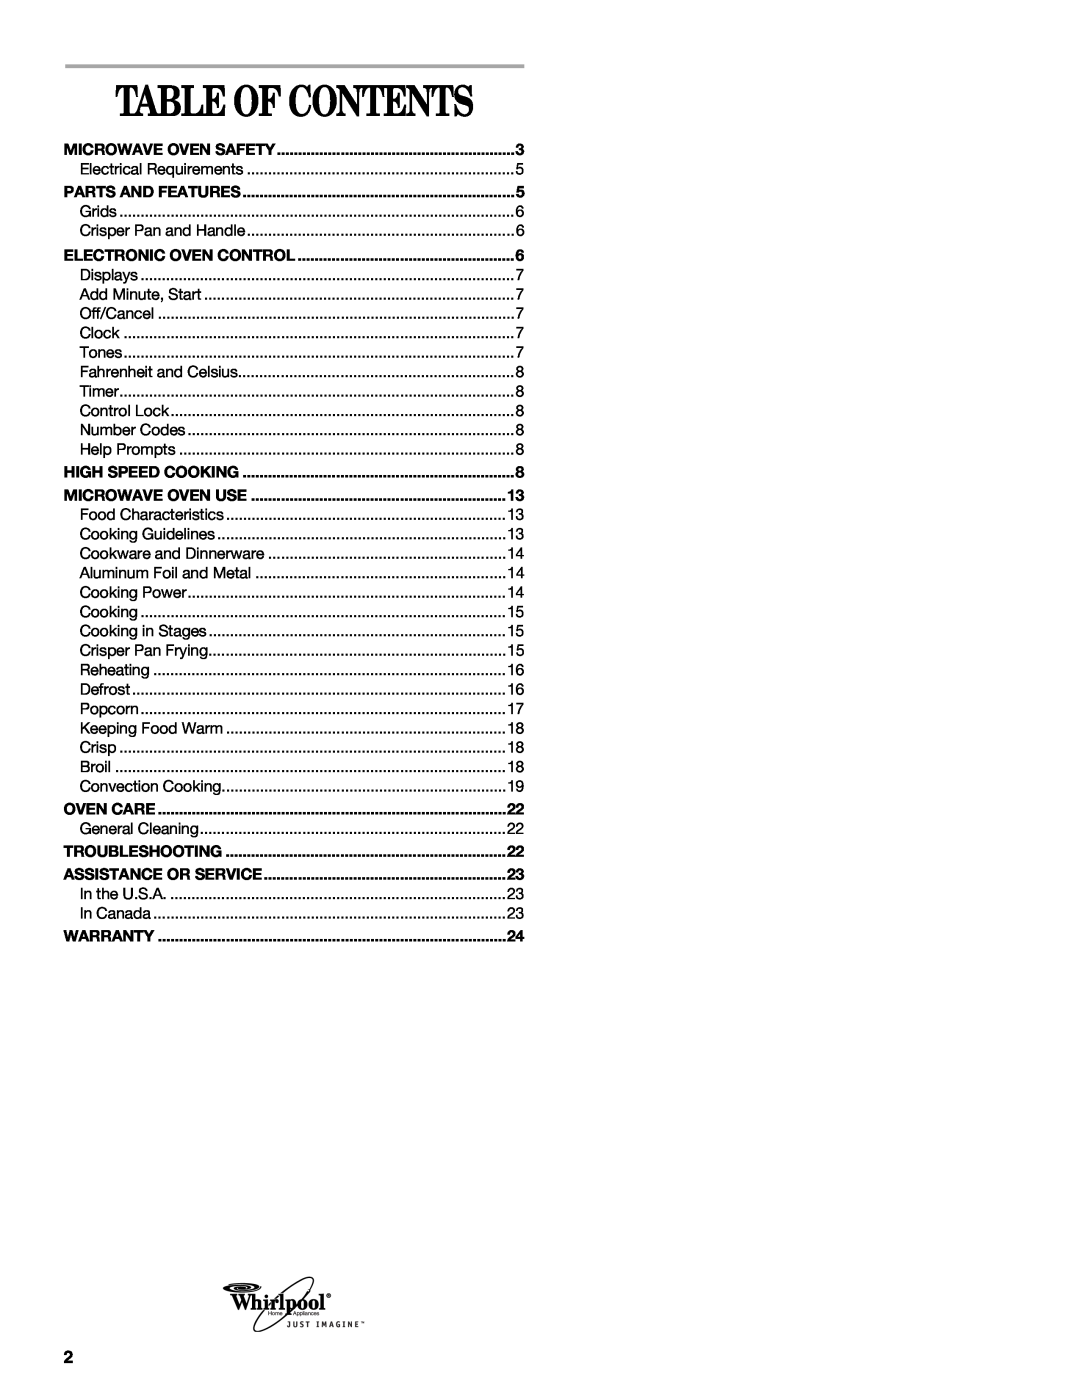 Whirlpool YGSC278, GSC308 Table Of Contents, Microwave Oven Safety, Parts And Features, Electronic Oven Control, Oven Care 